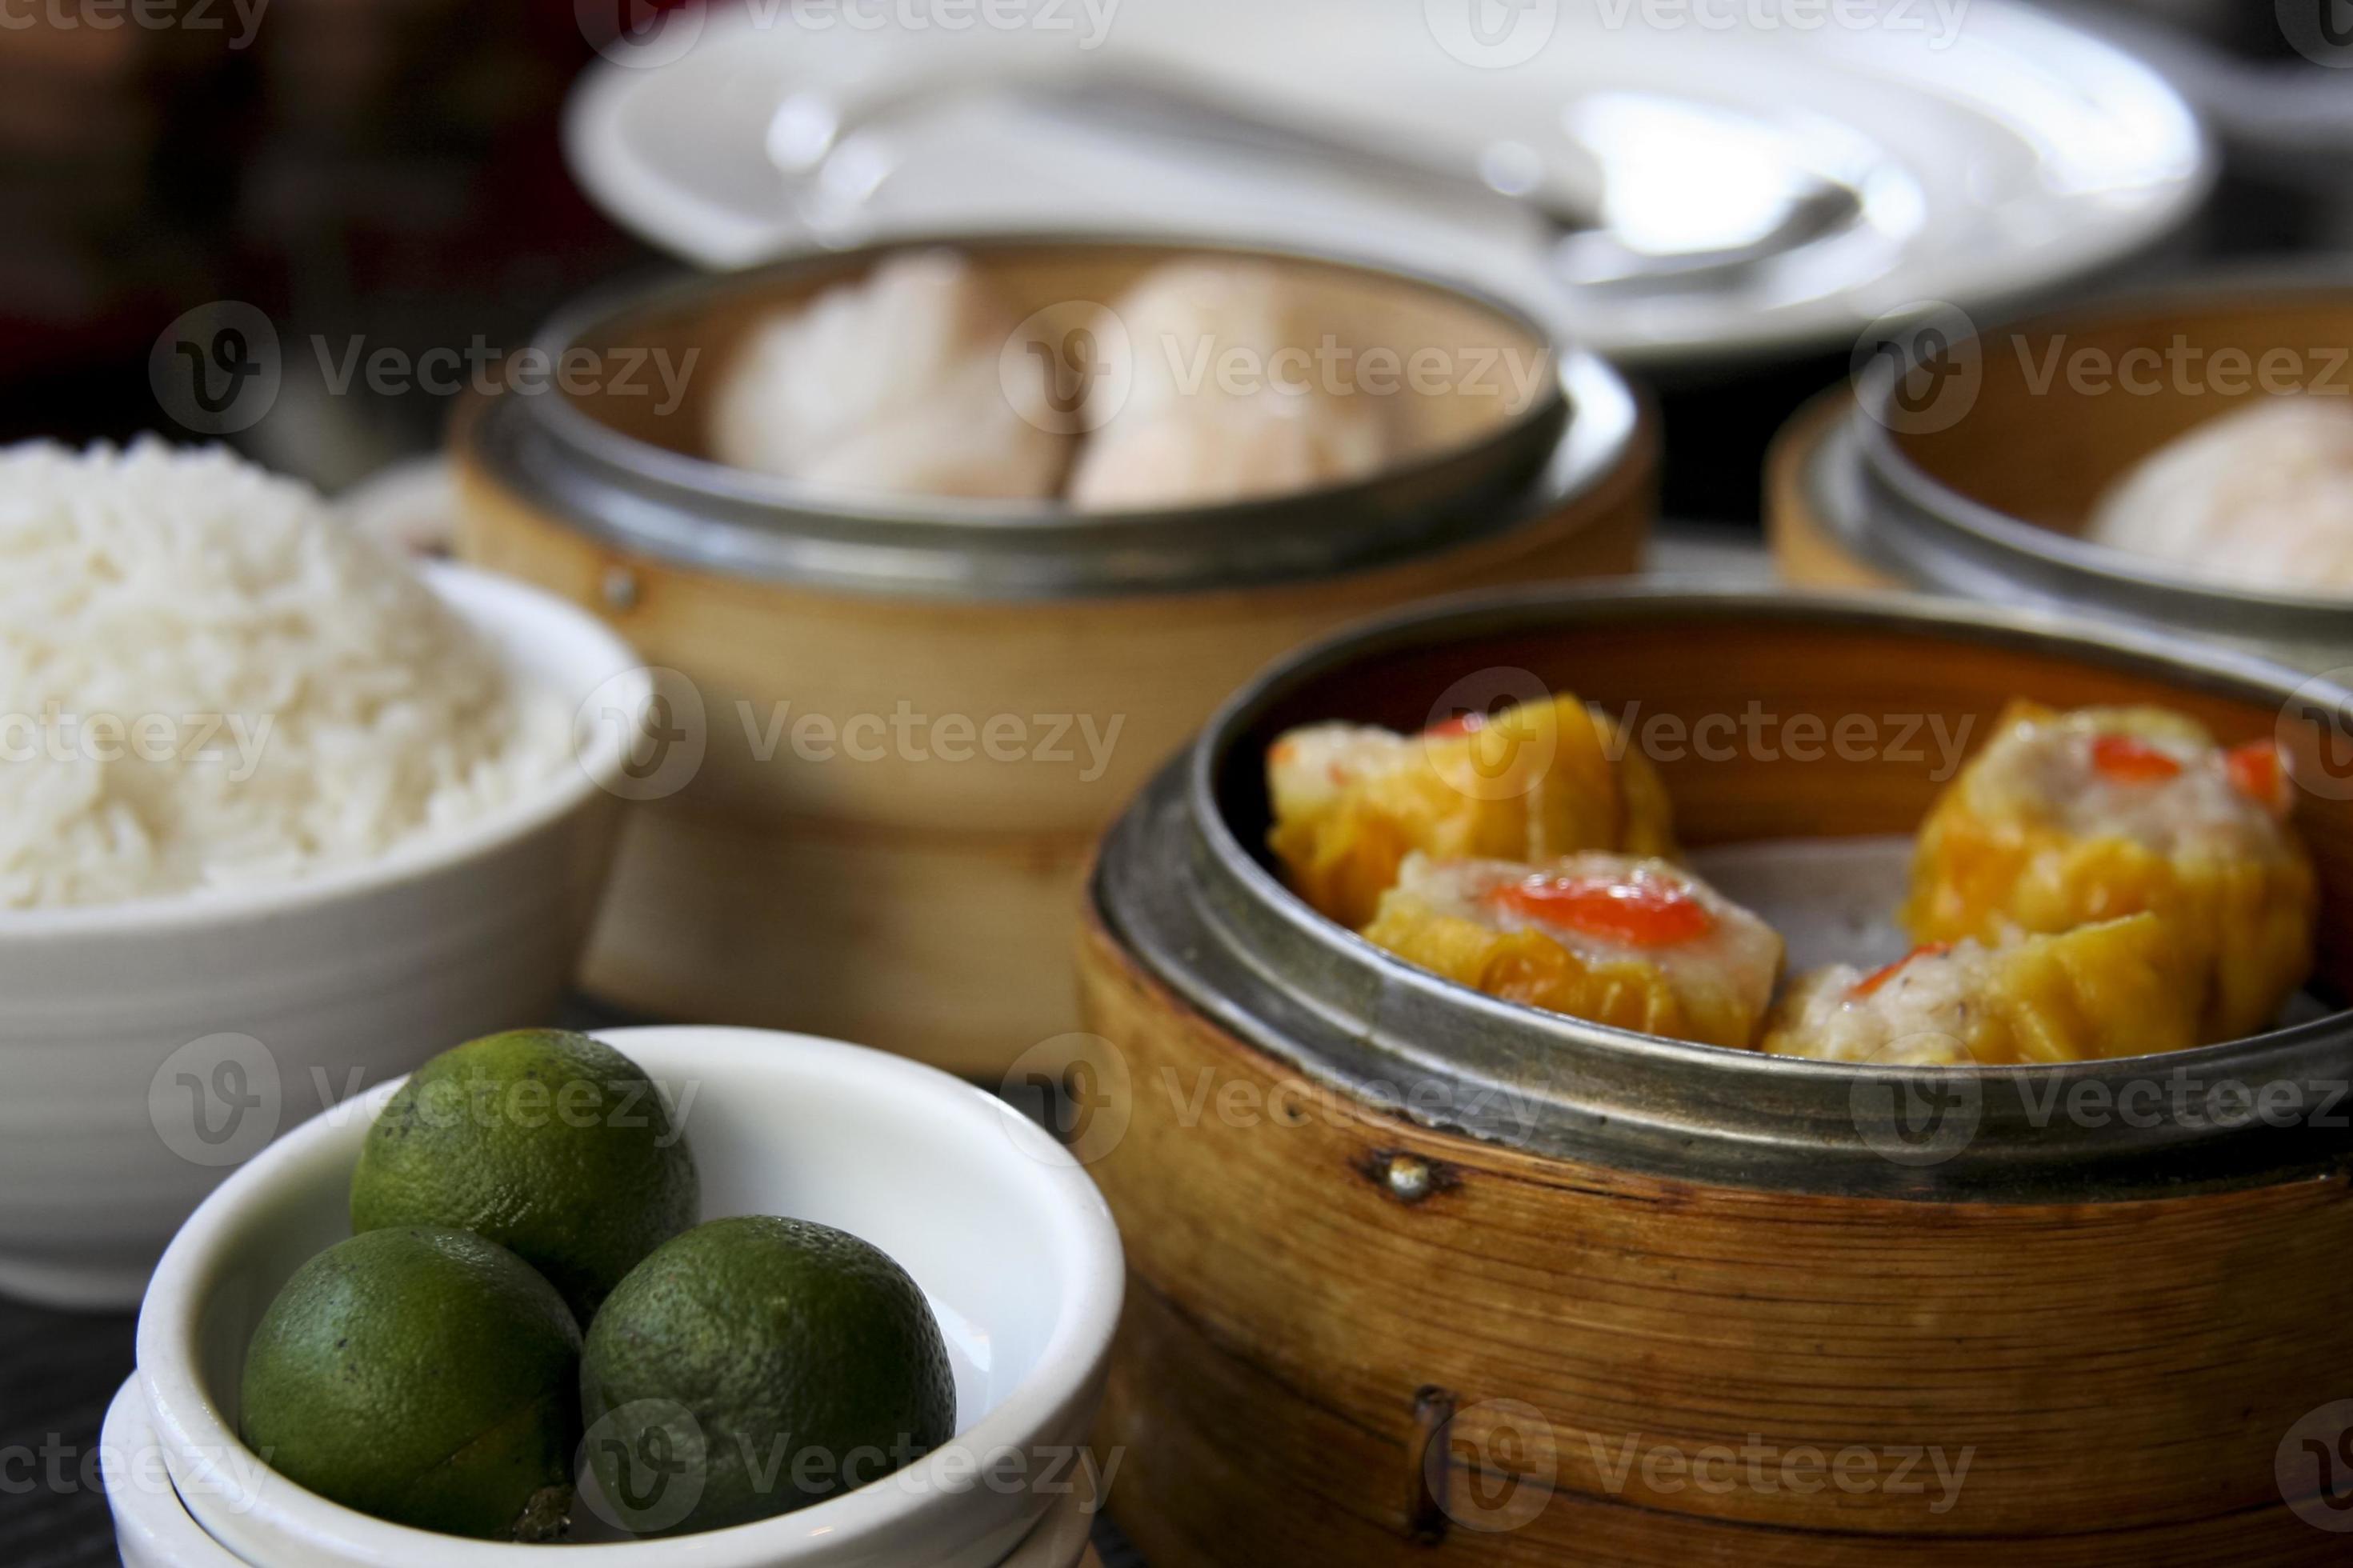 Is dim sum a full meal?